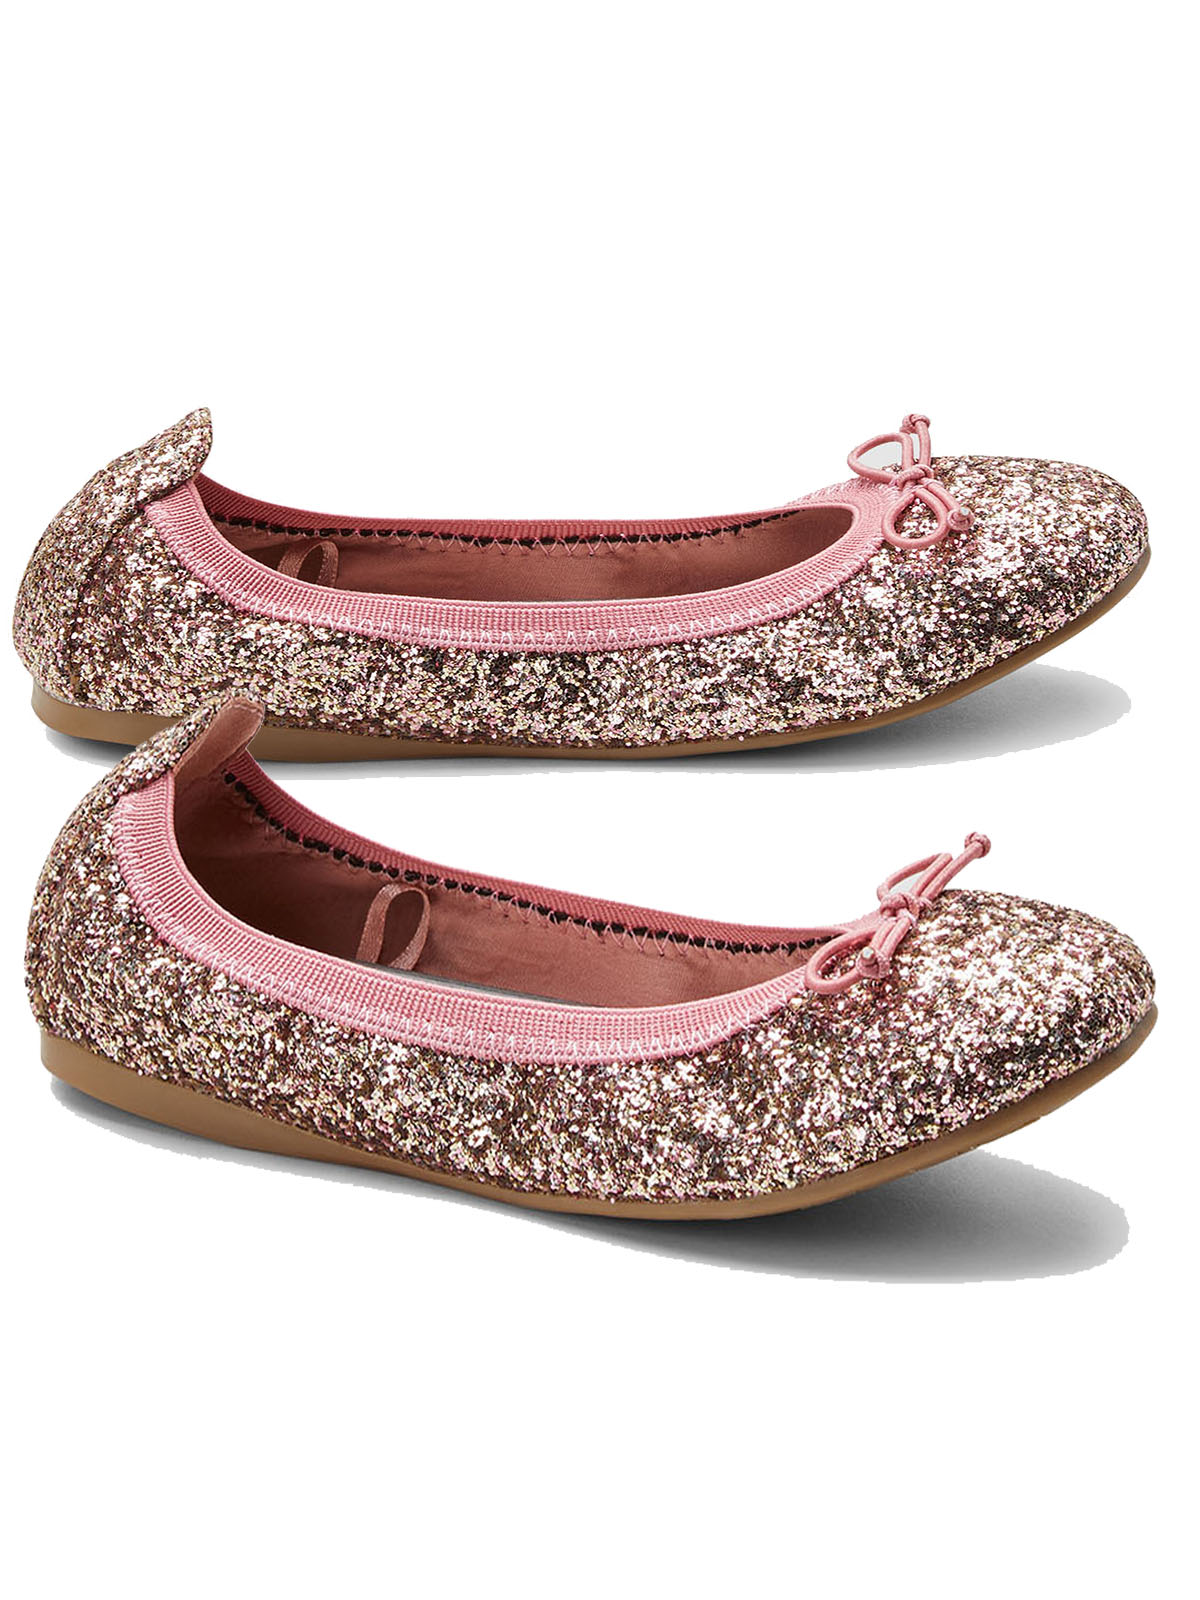 Girls ballet style shoes